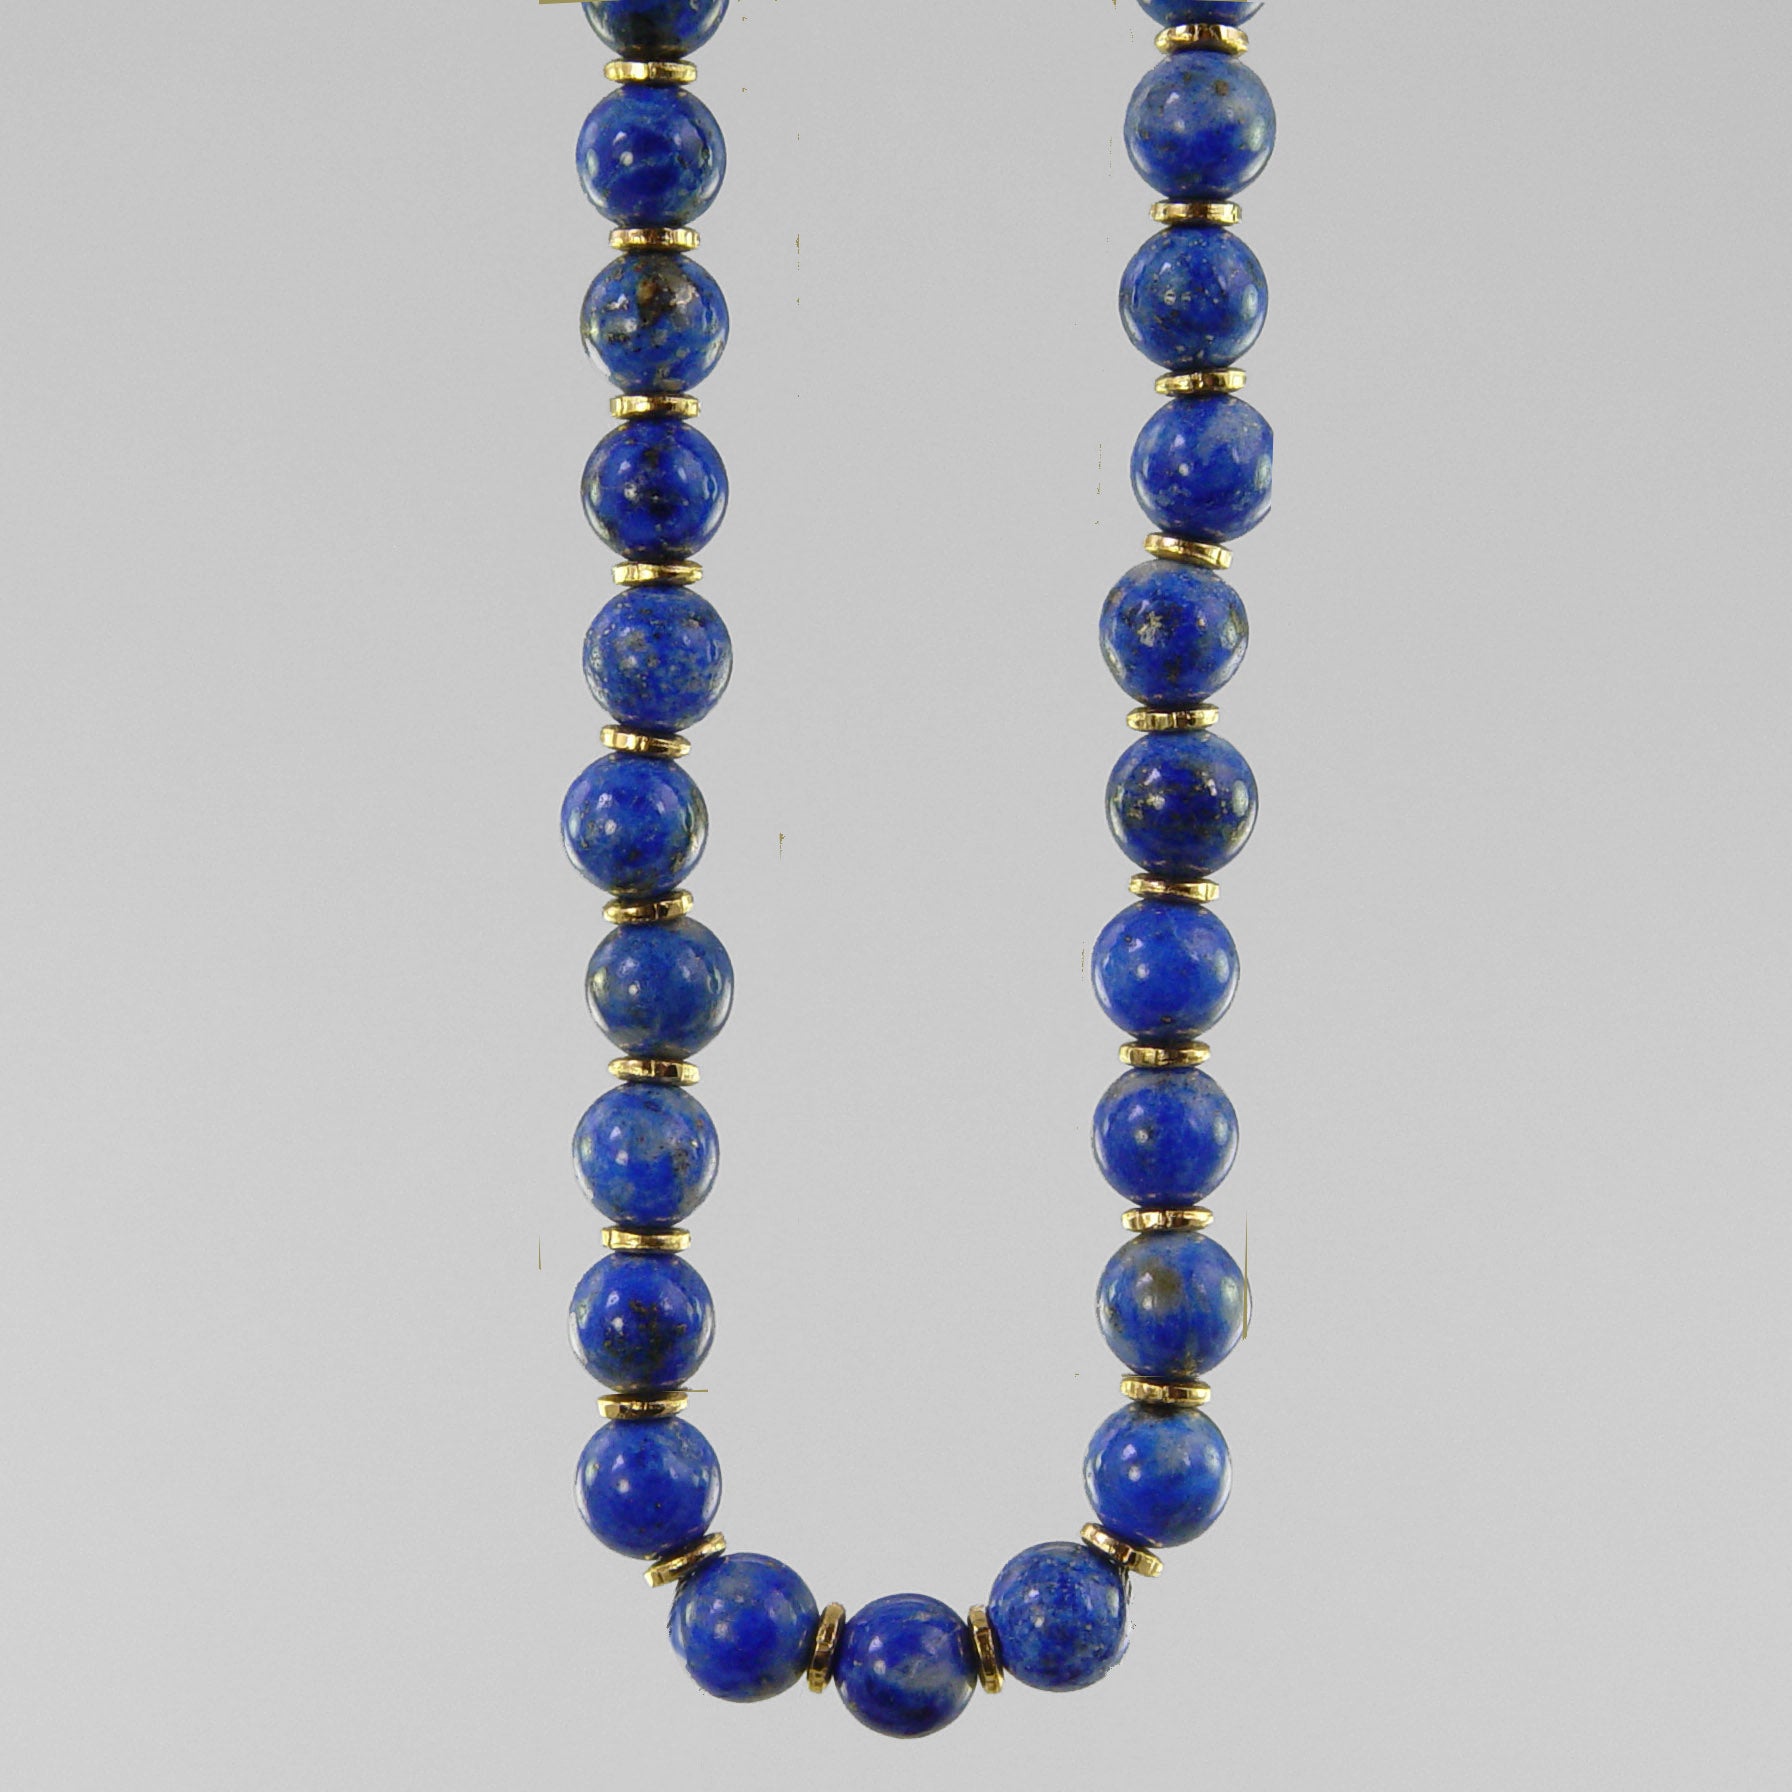 Lot - A lapis lazuli and gold bead necklace